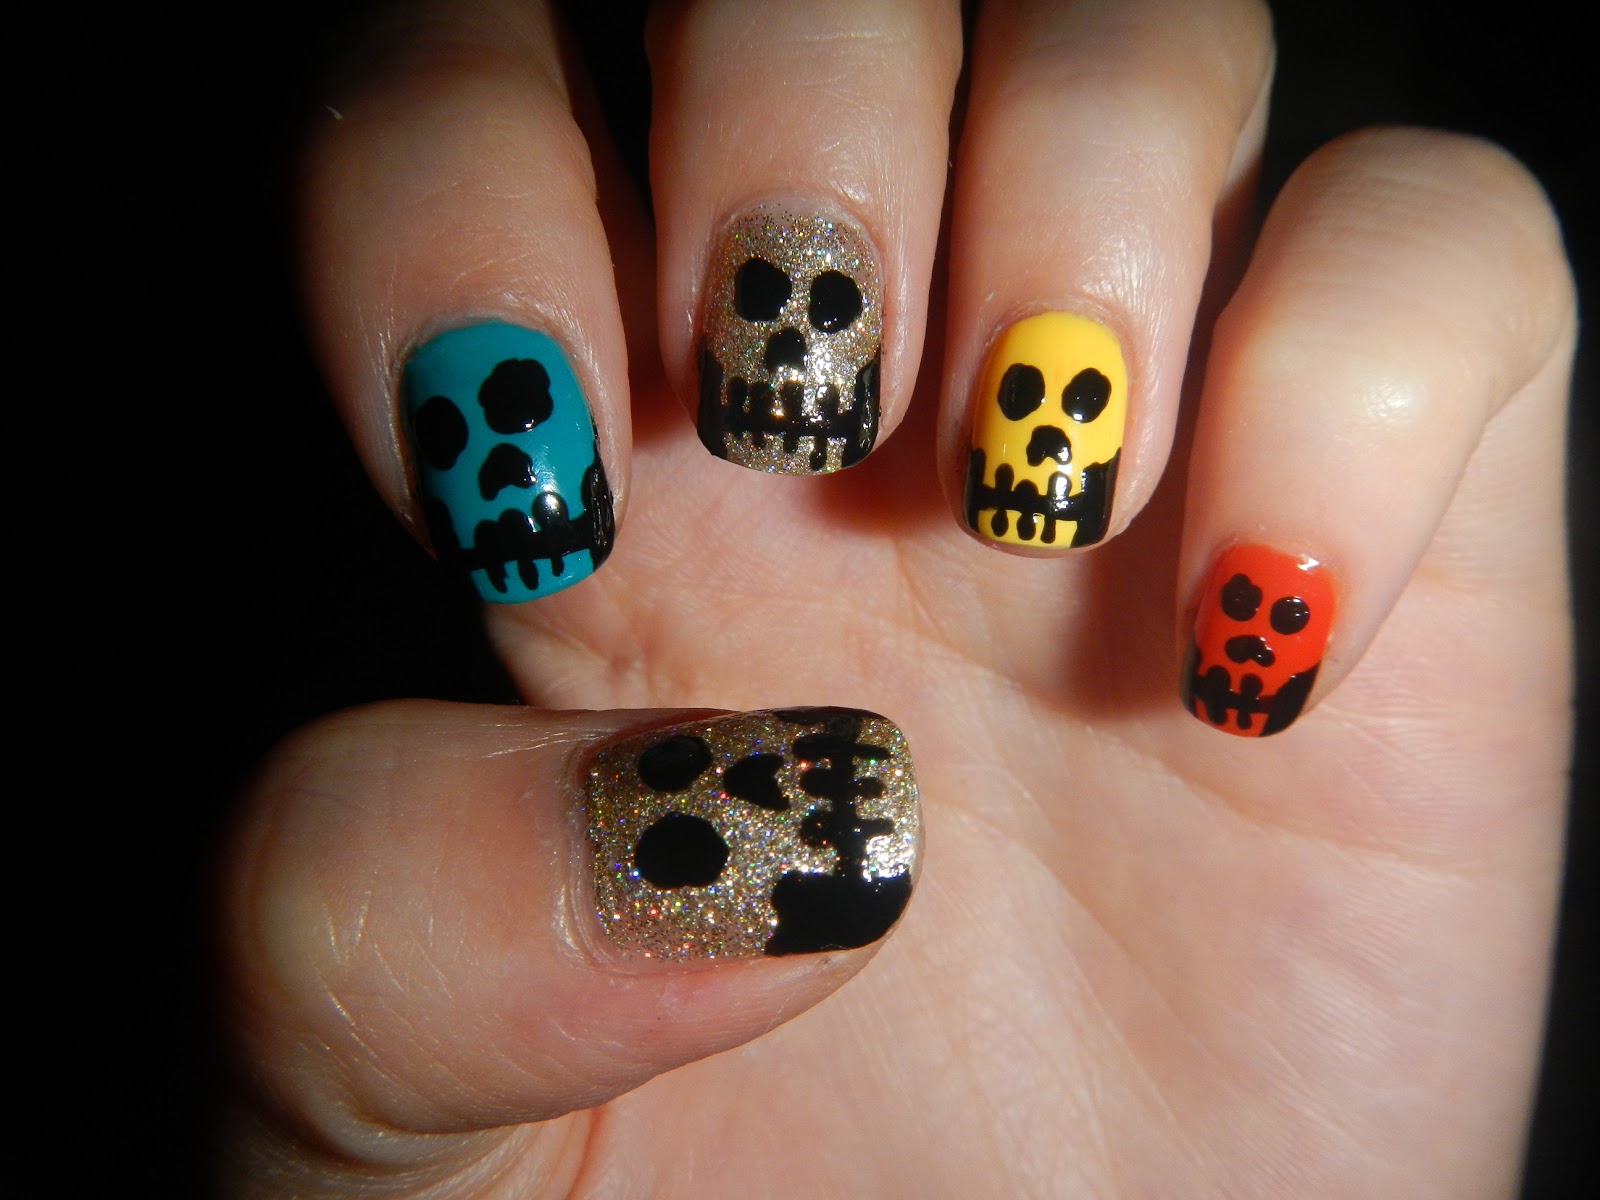 Skull and Rose Nail Art Designs - wide 6